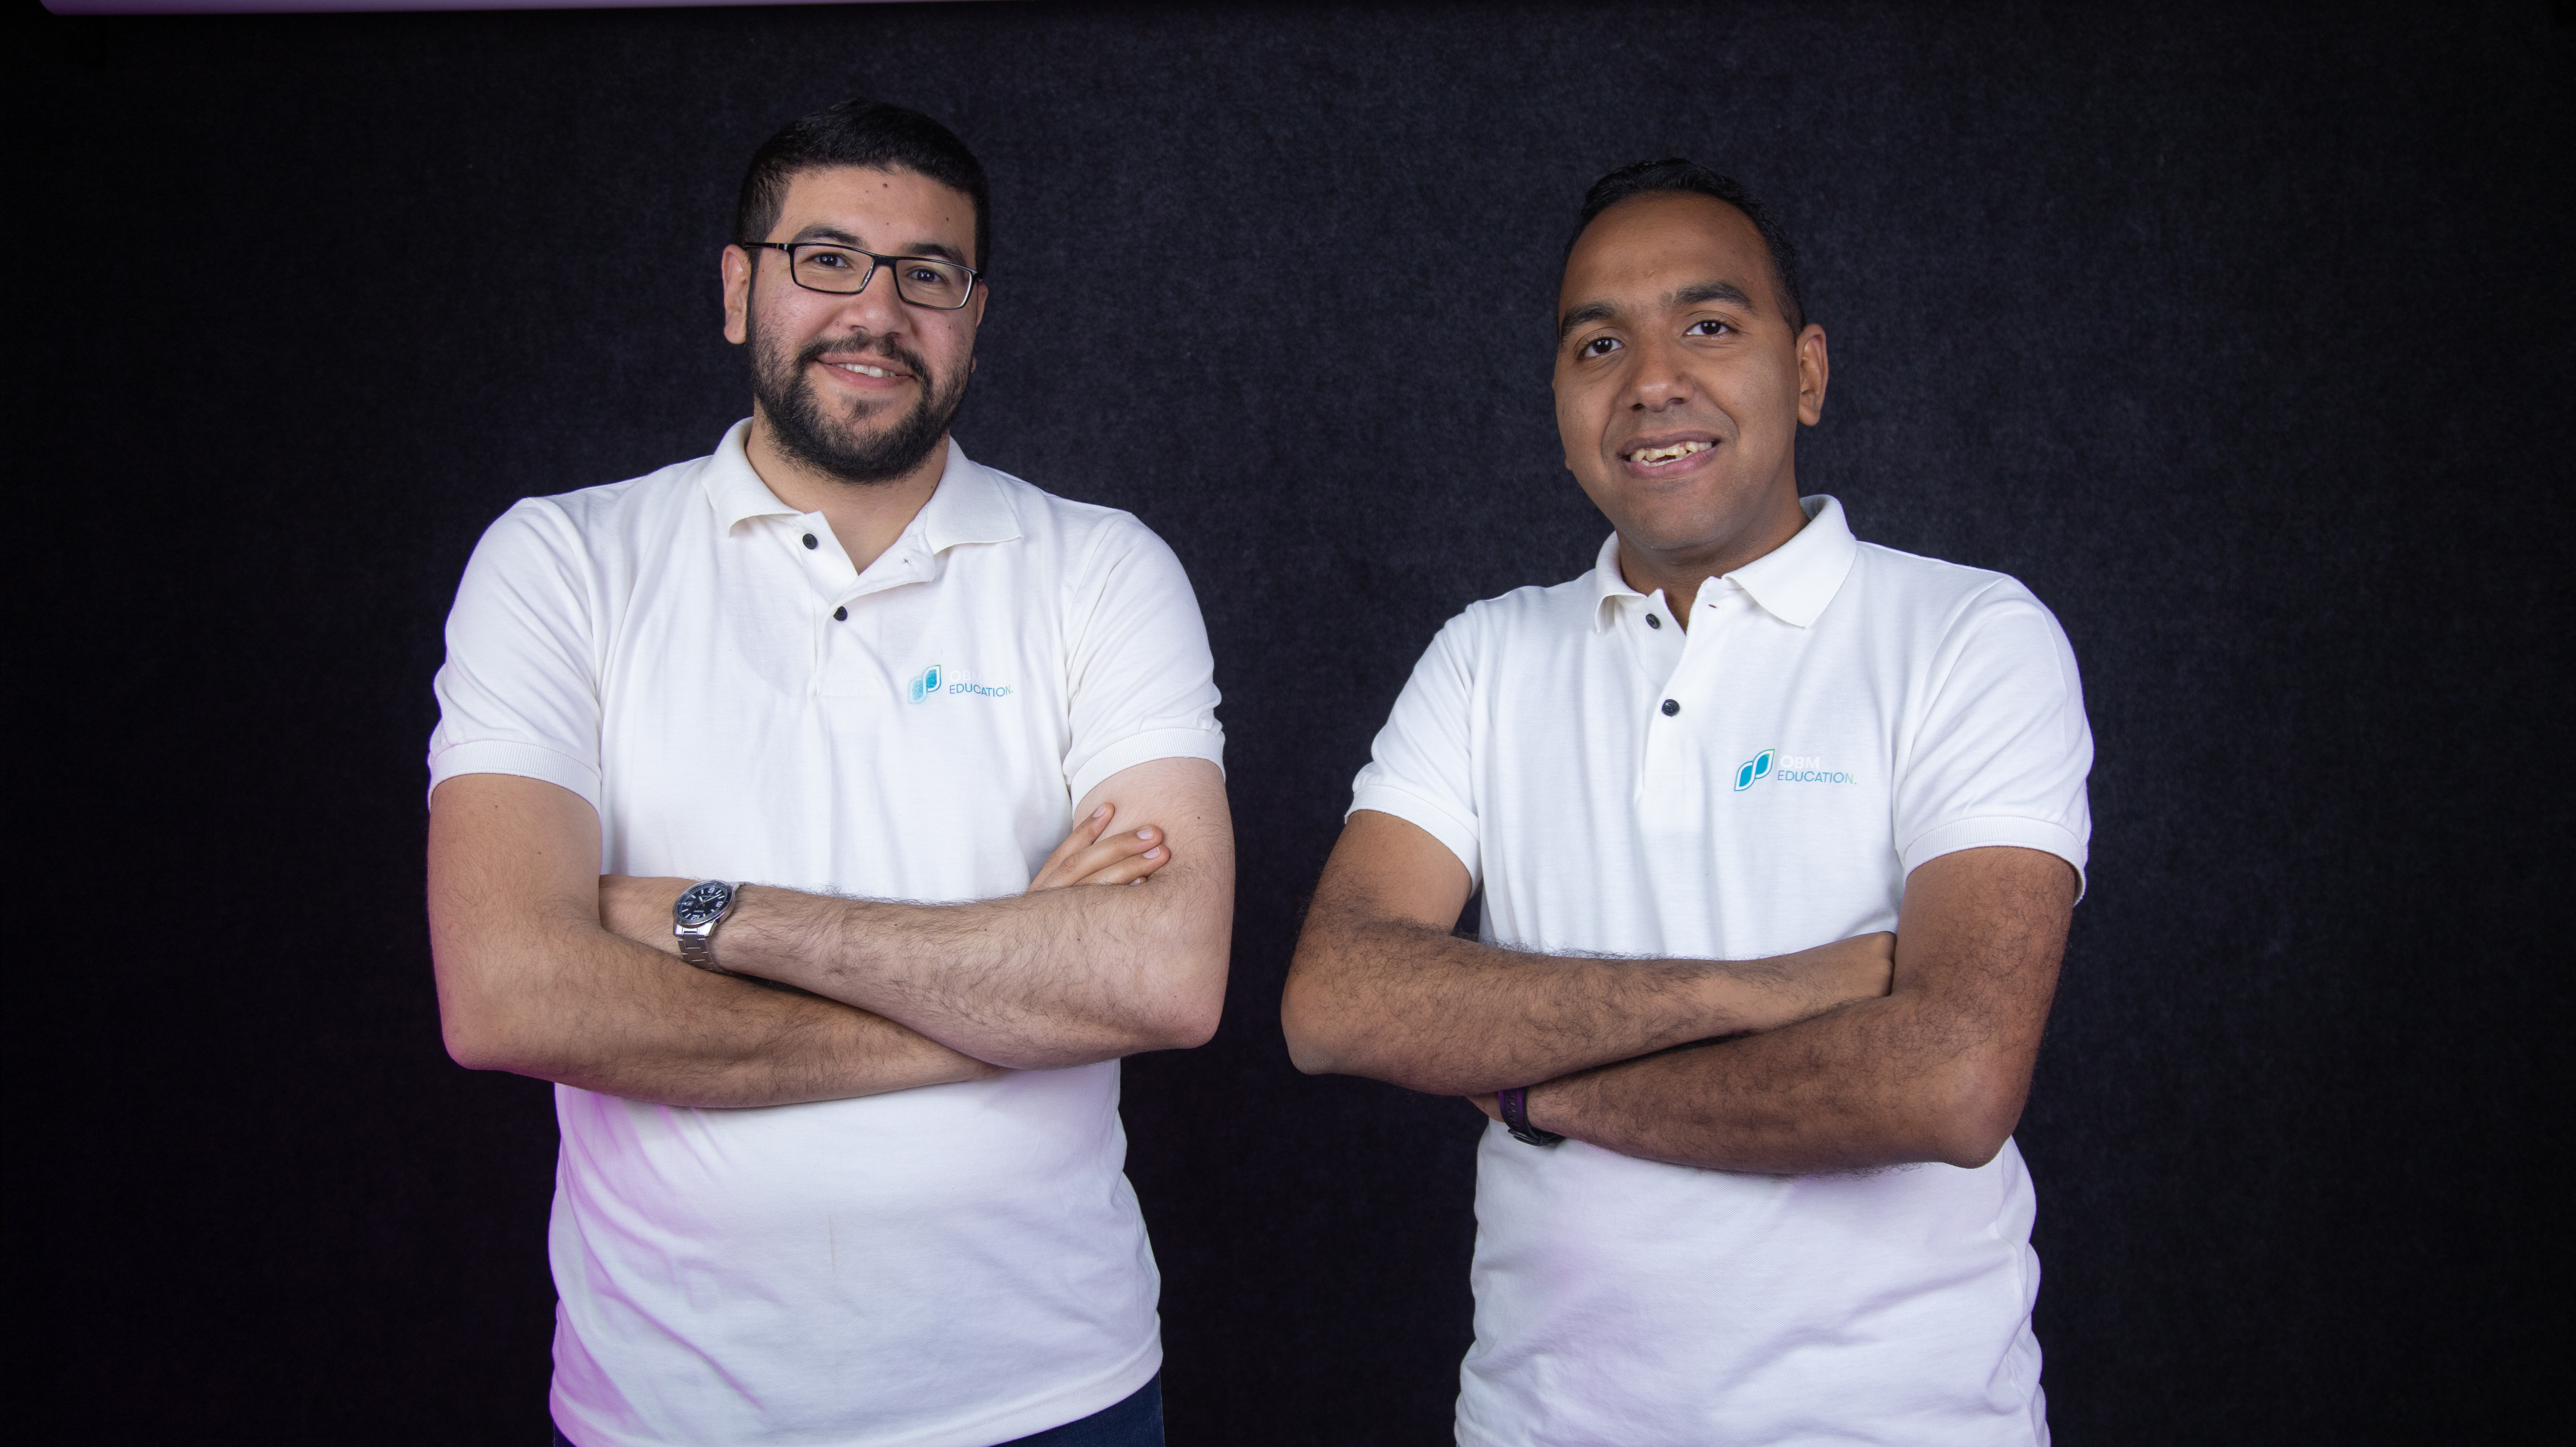 The Fastest-Growing Investment Edtech Fund in MENA